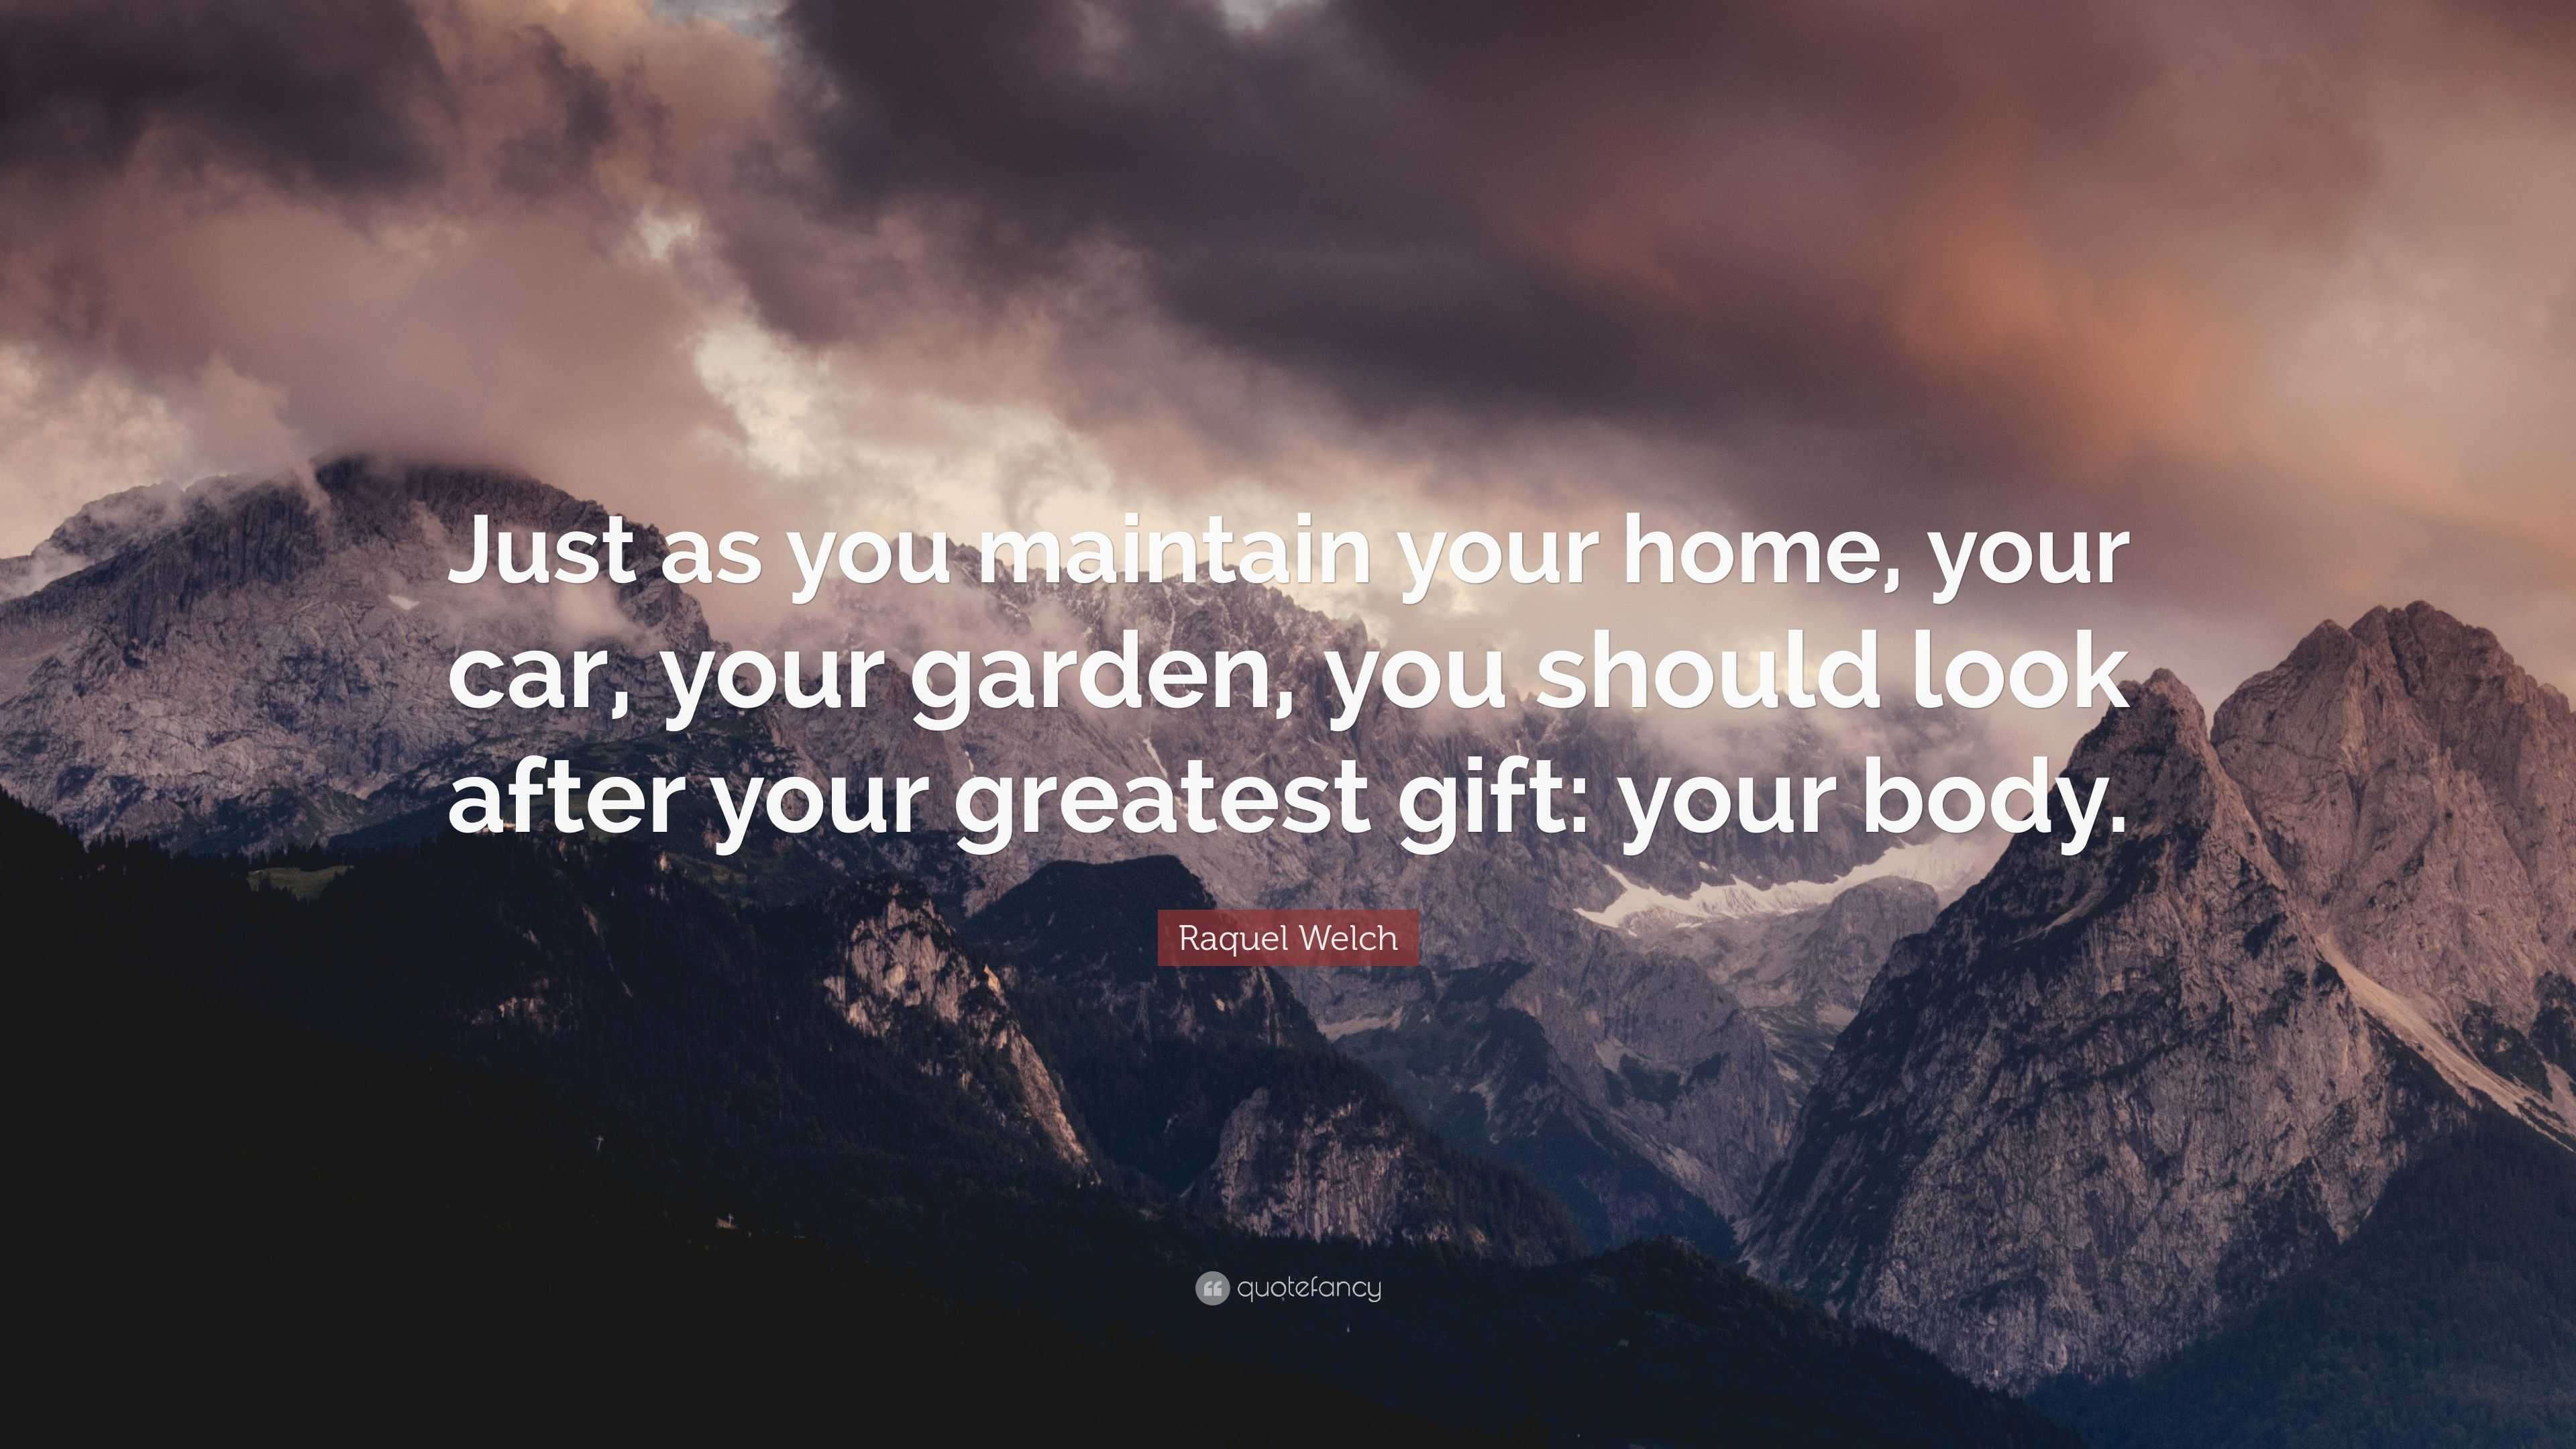 Raquel Welch Quote: “Just as you maintain your home, your car, your ...